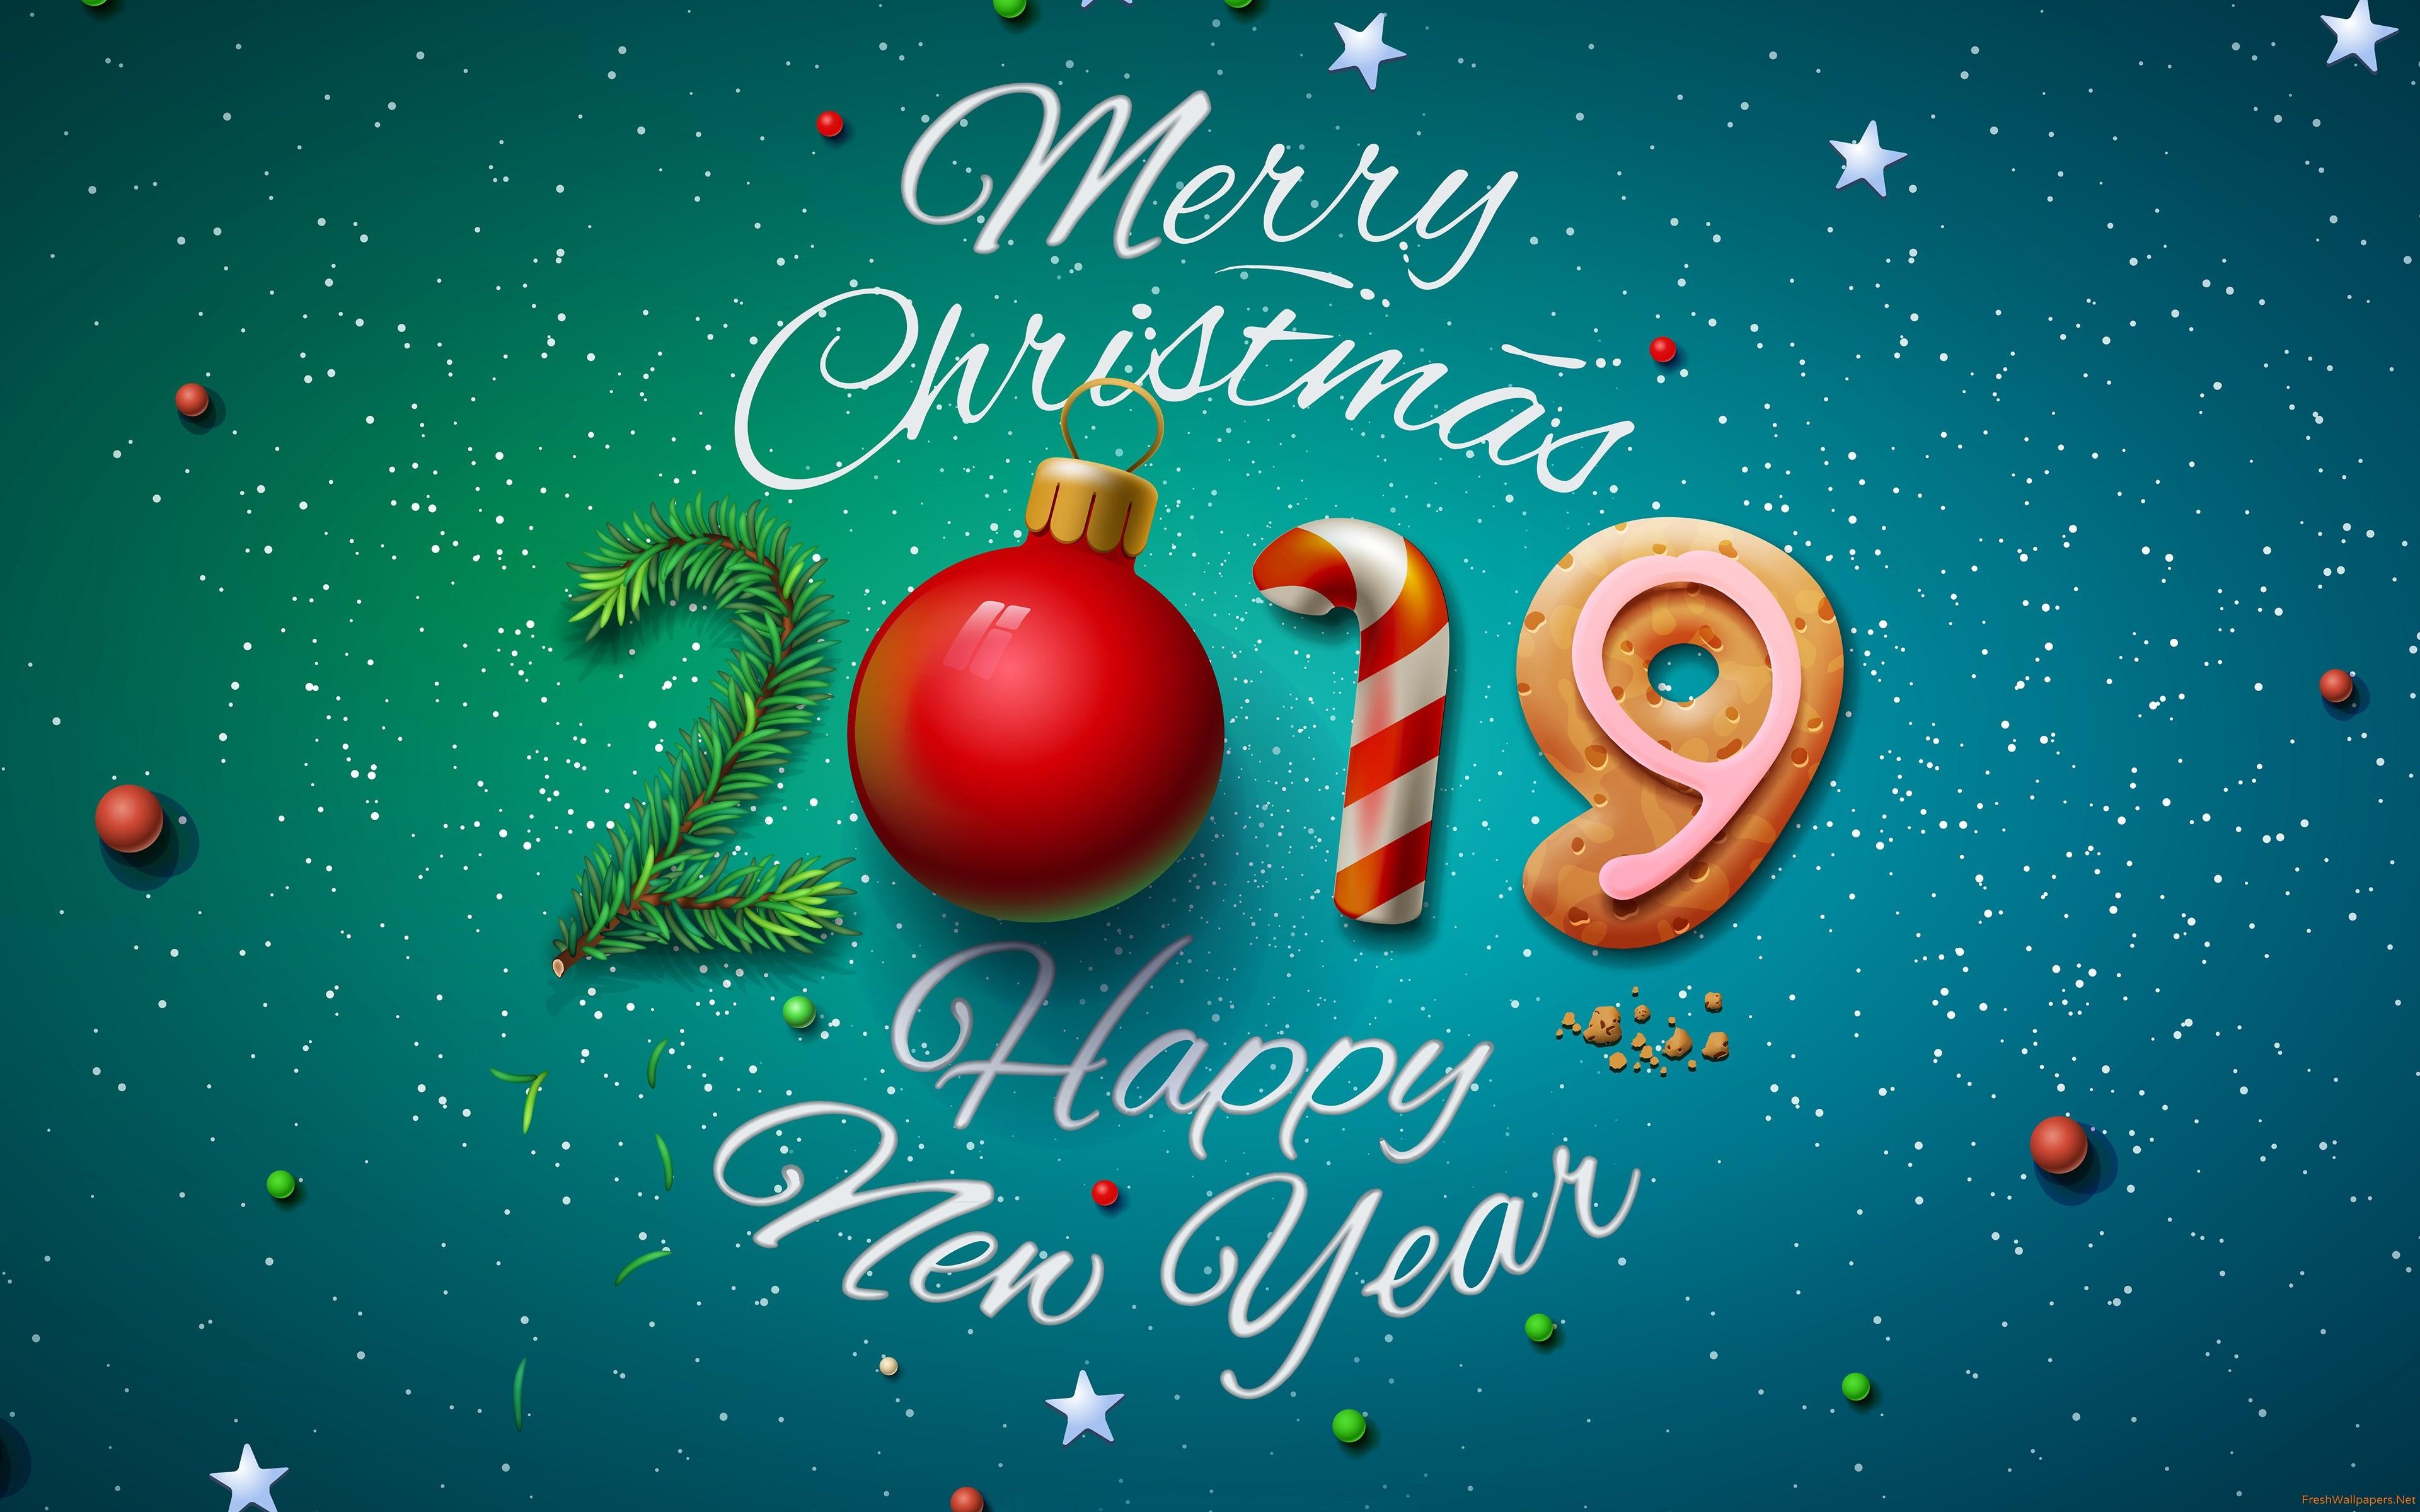 Merry Christmas 2019 Happy New Year wallpaper